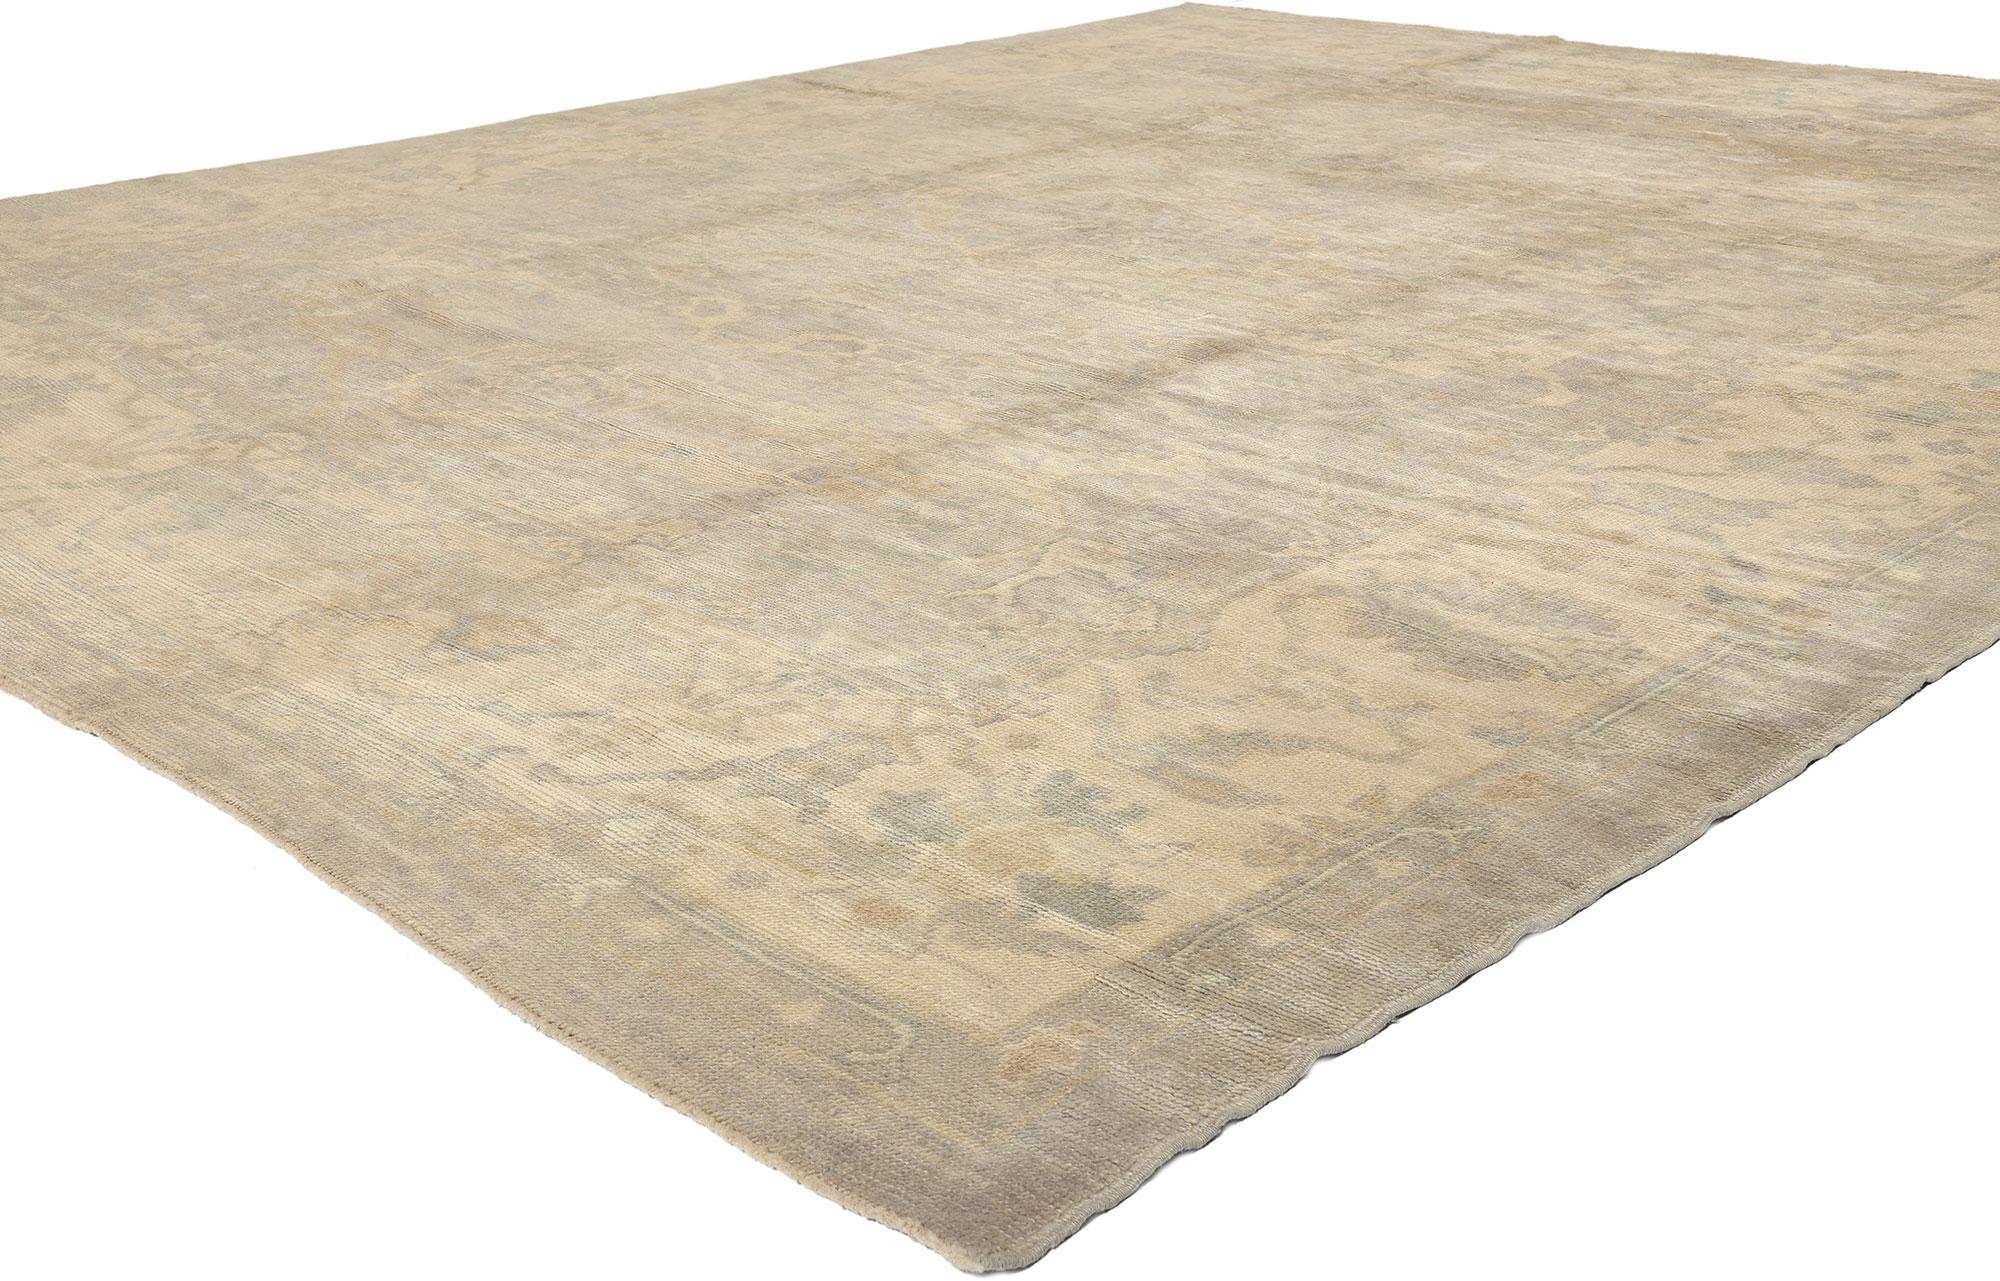 51858 New Neutral Turkish Oushak Rug, 10'10 x 12'08. In the mesmerizing realm of contemporary elegance and Anatolian allure, this hand-knotted wool Turkish Oushak rug weaves a story of timeless charm. Within its abrashed silver-gray field, a